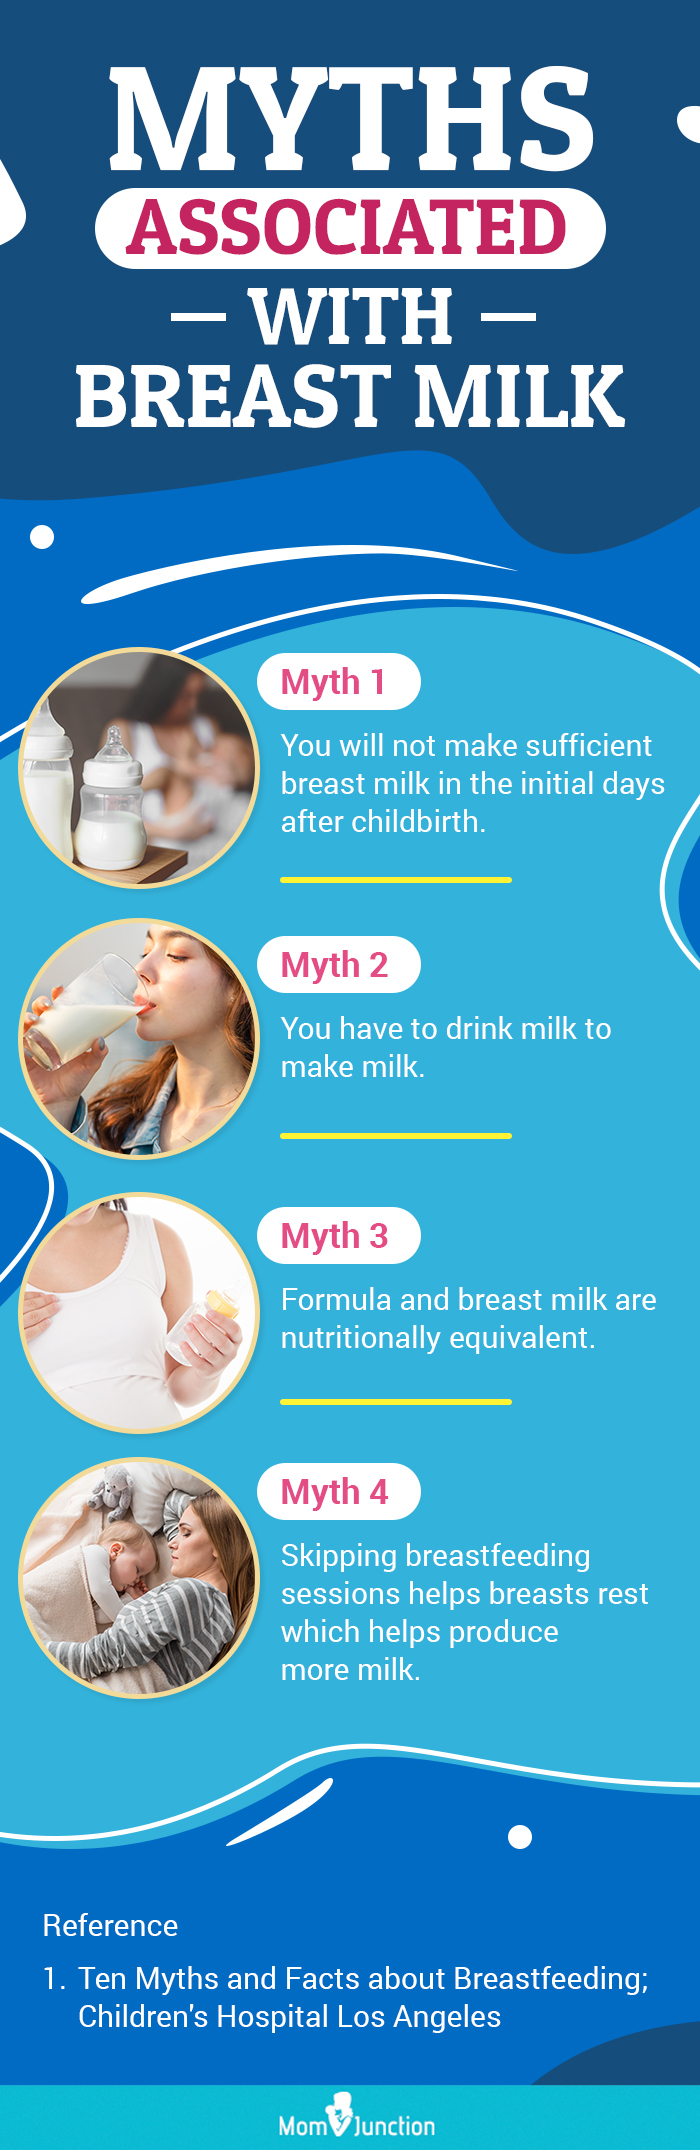 myths associated with breast milk (infographic)